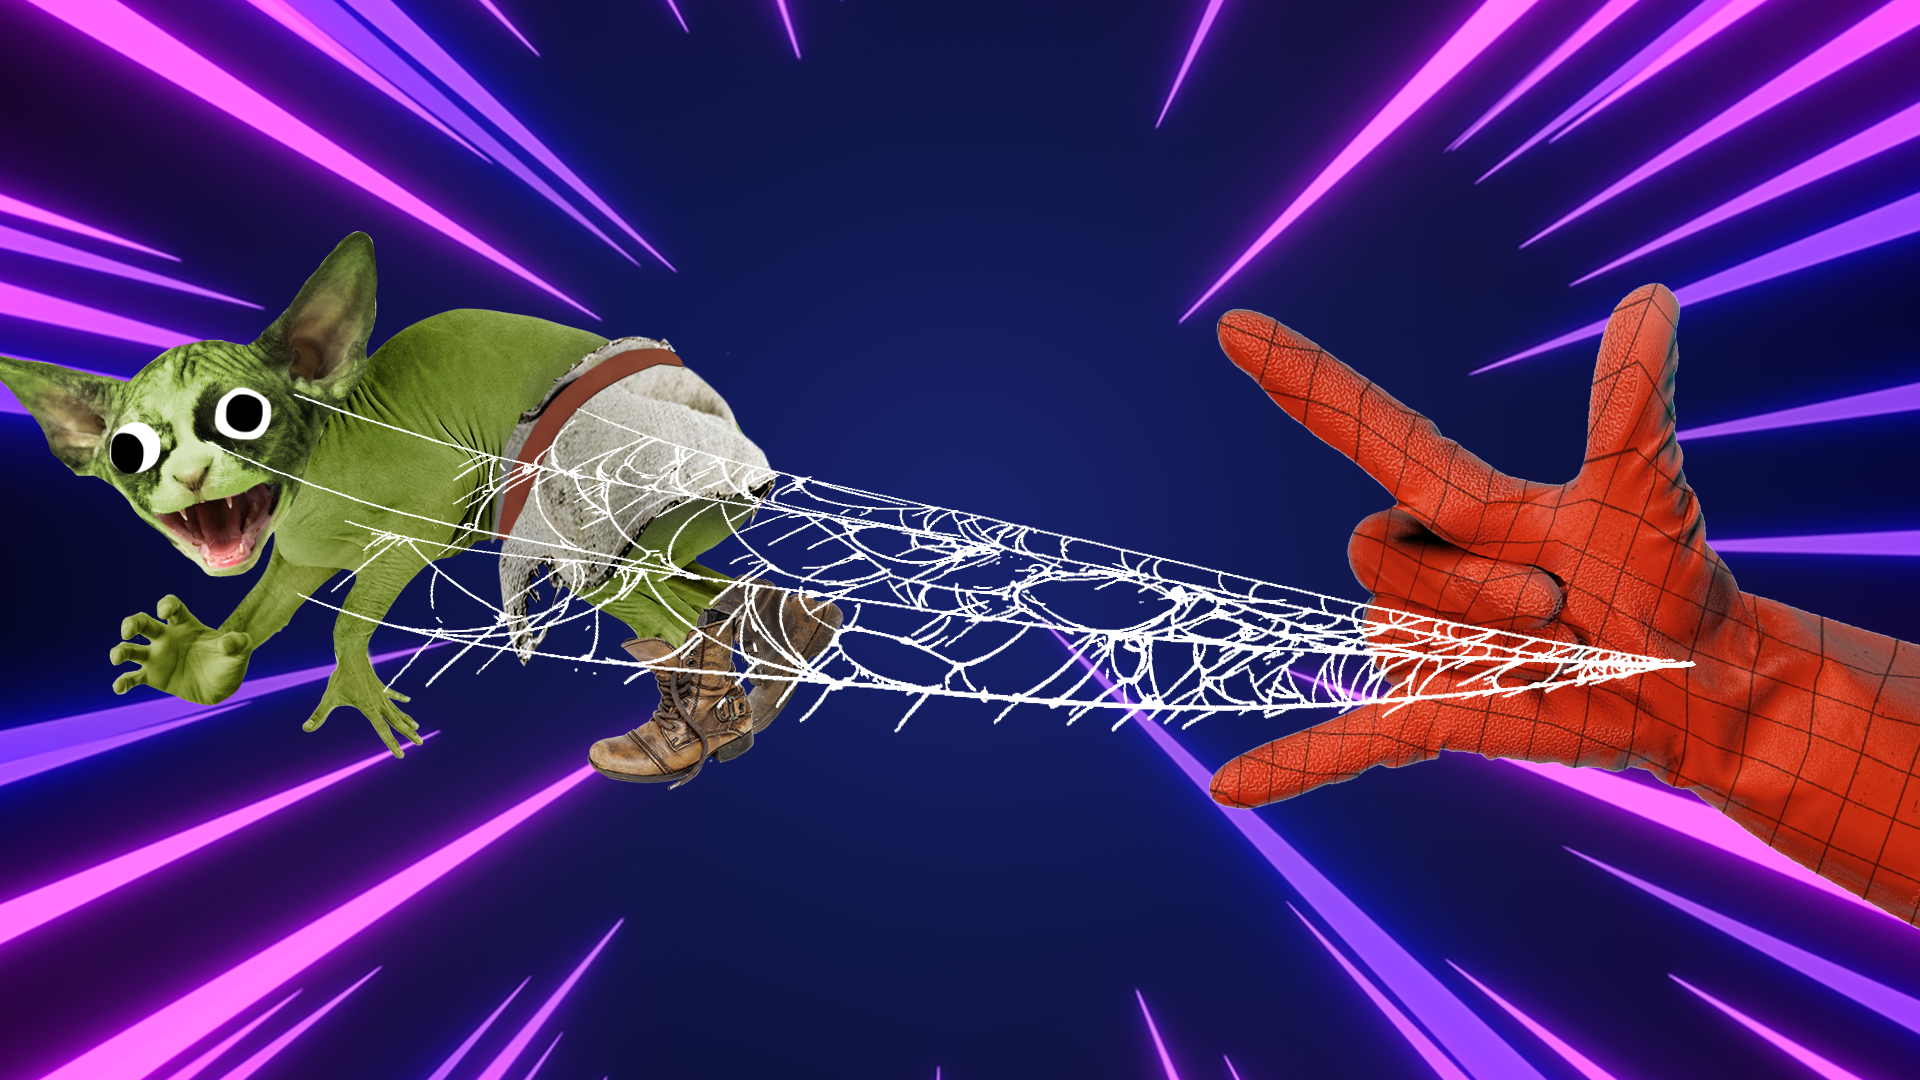 Beano spider-Man hand, goblin and web on laser background